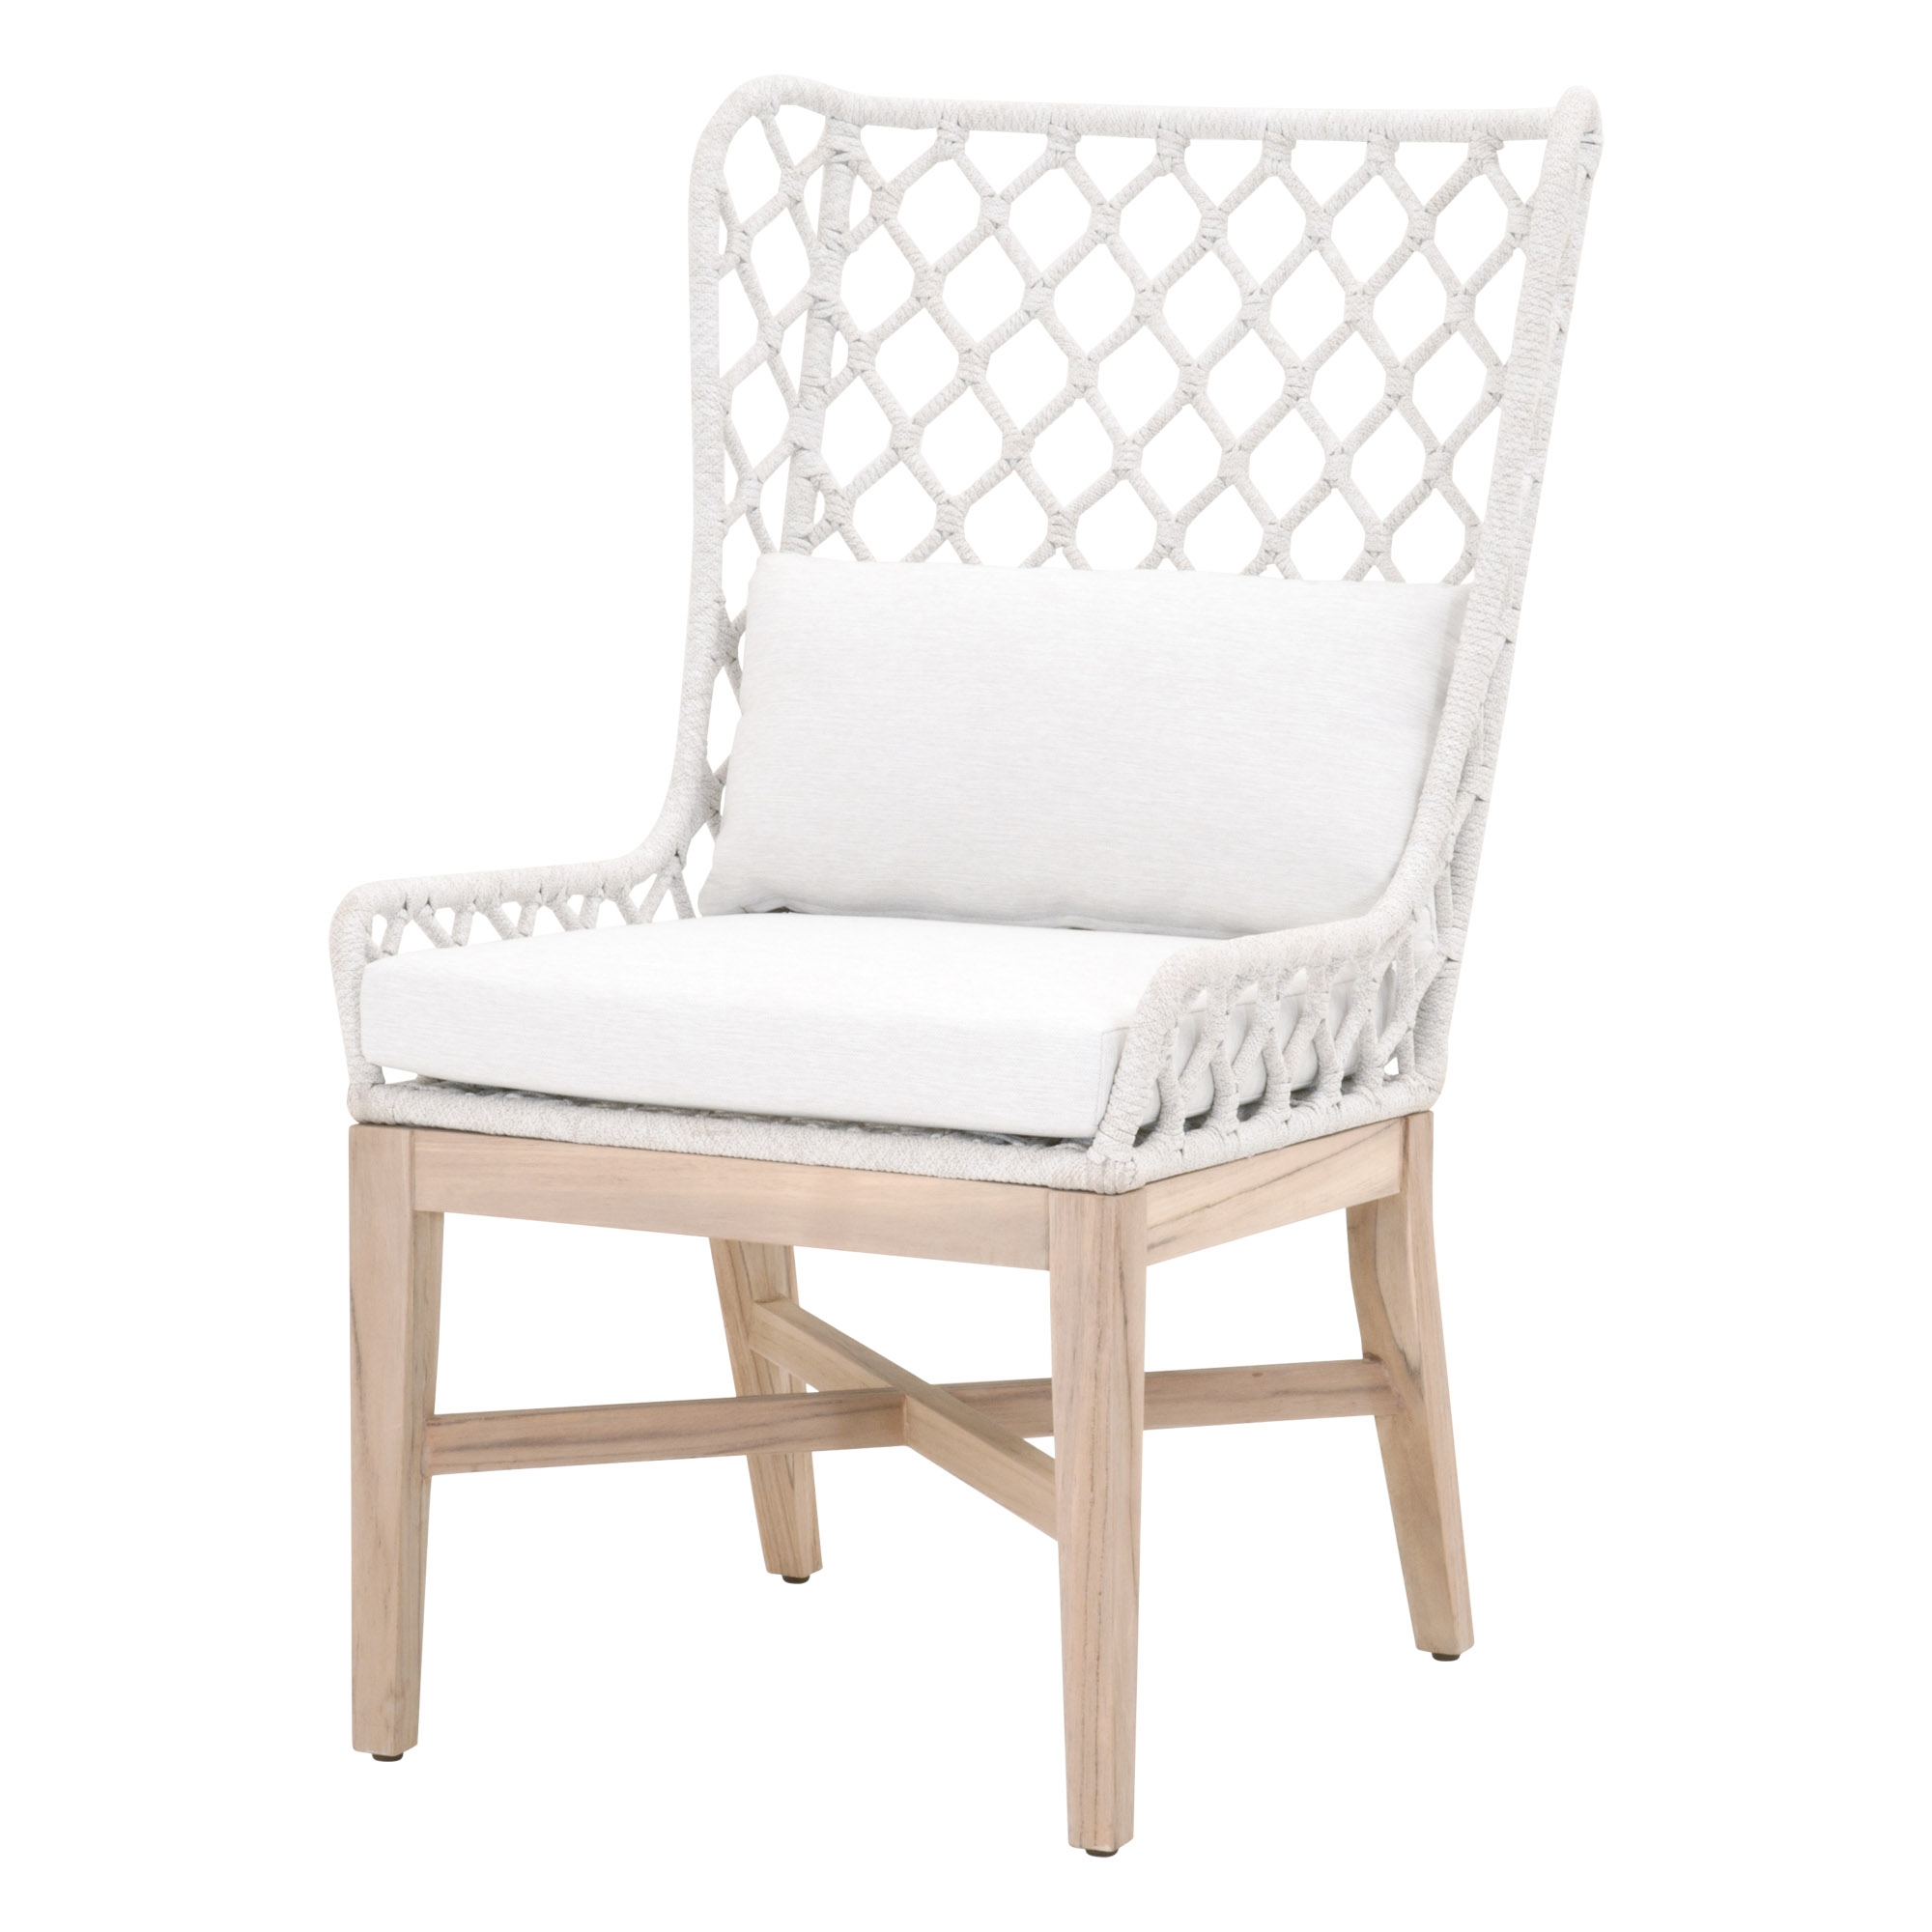 Lattis Outdoor Wing Chair, White - Image 1